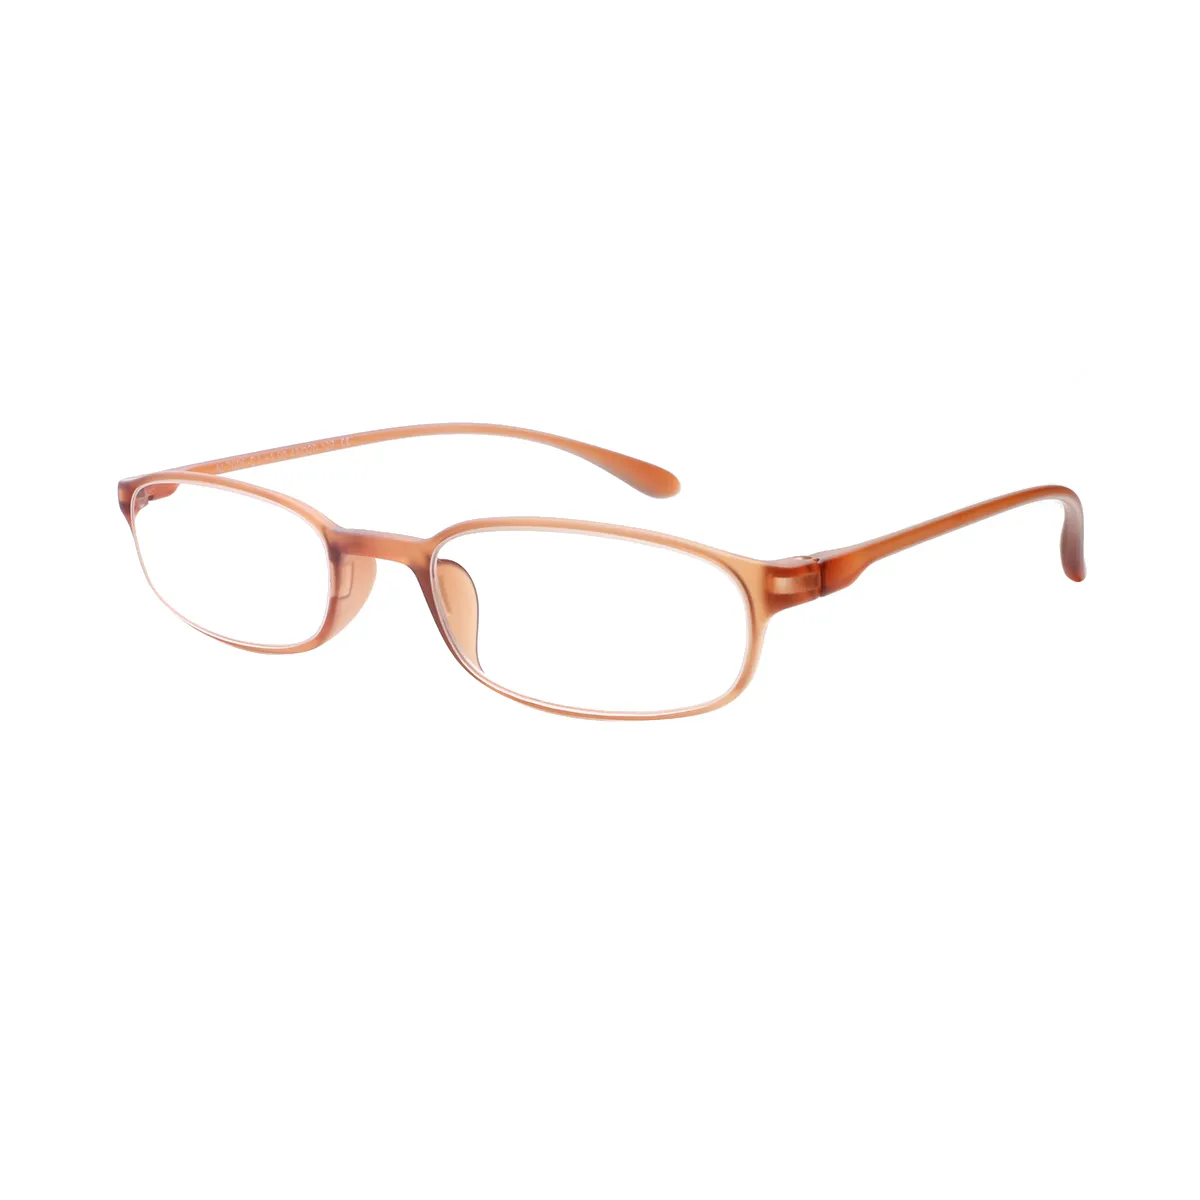 Fashion Rectangle Brown-transparent Reading Glasses for Women